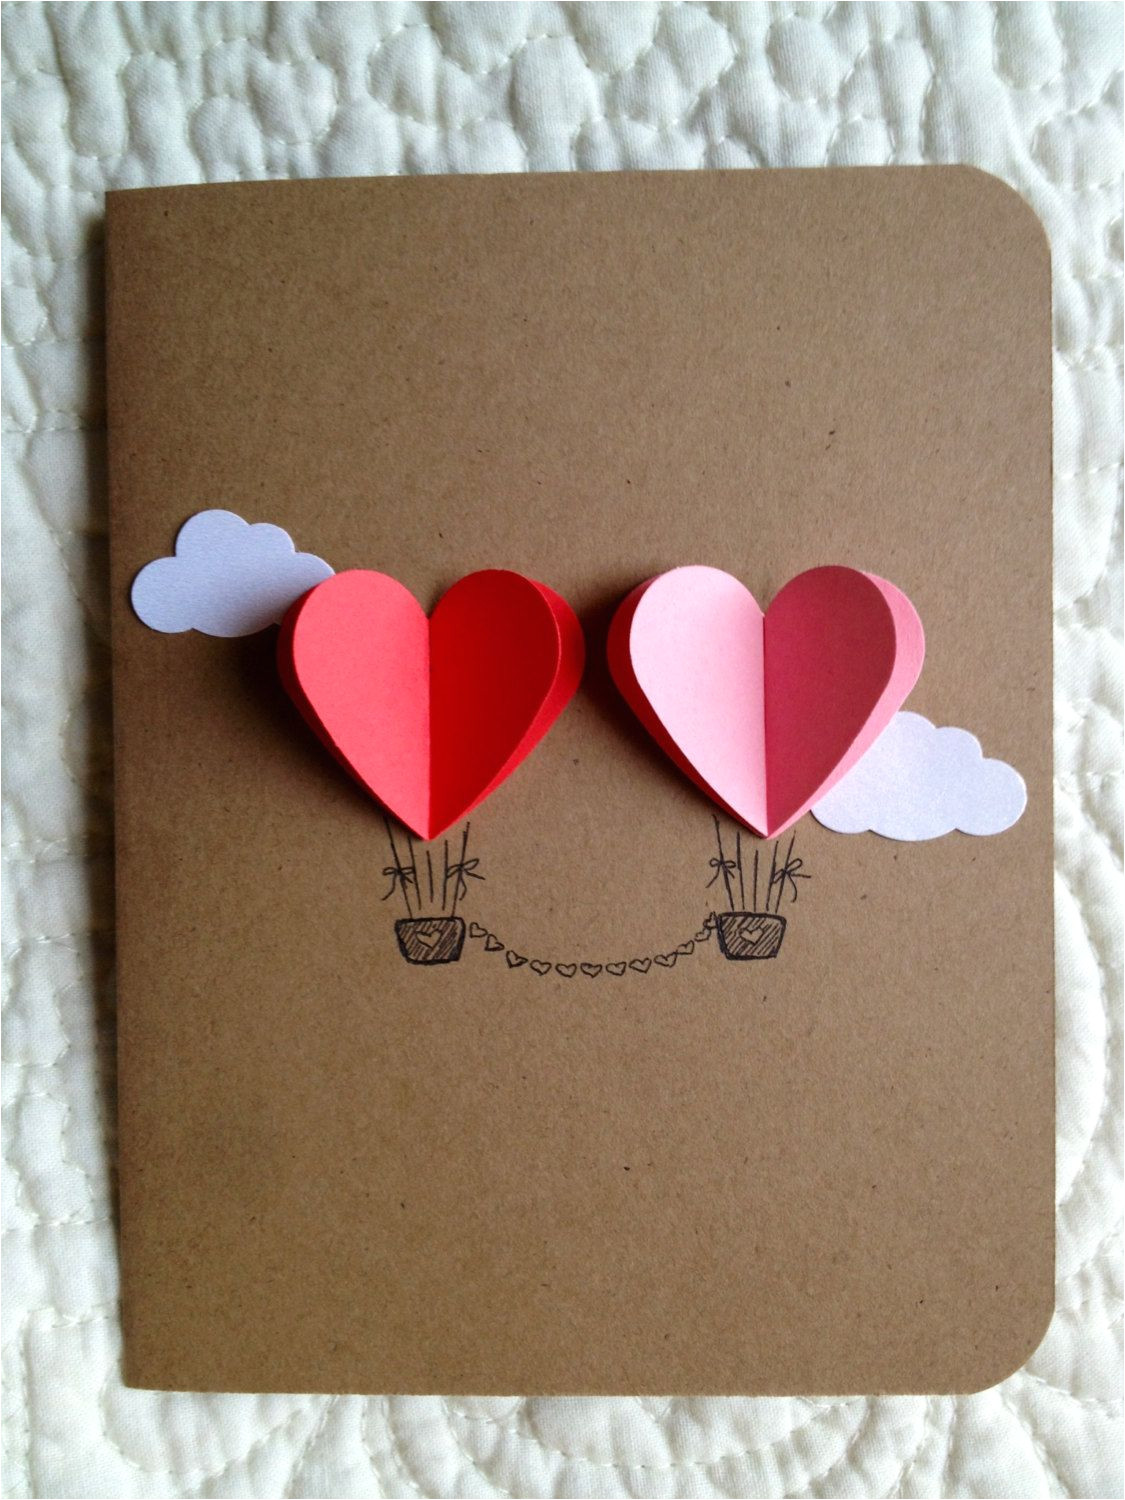 Ideas for Wedding Anniversary Card Couple Heart Hot Air Balloon Card Red Pink Cards